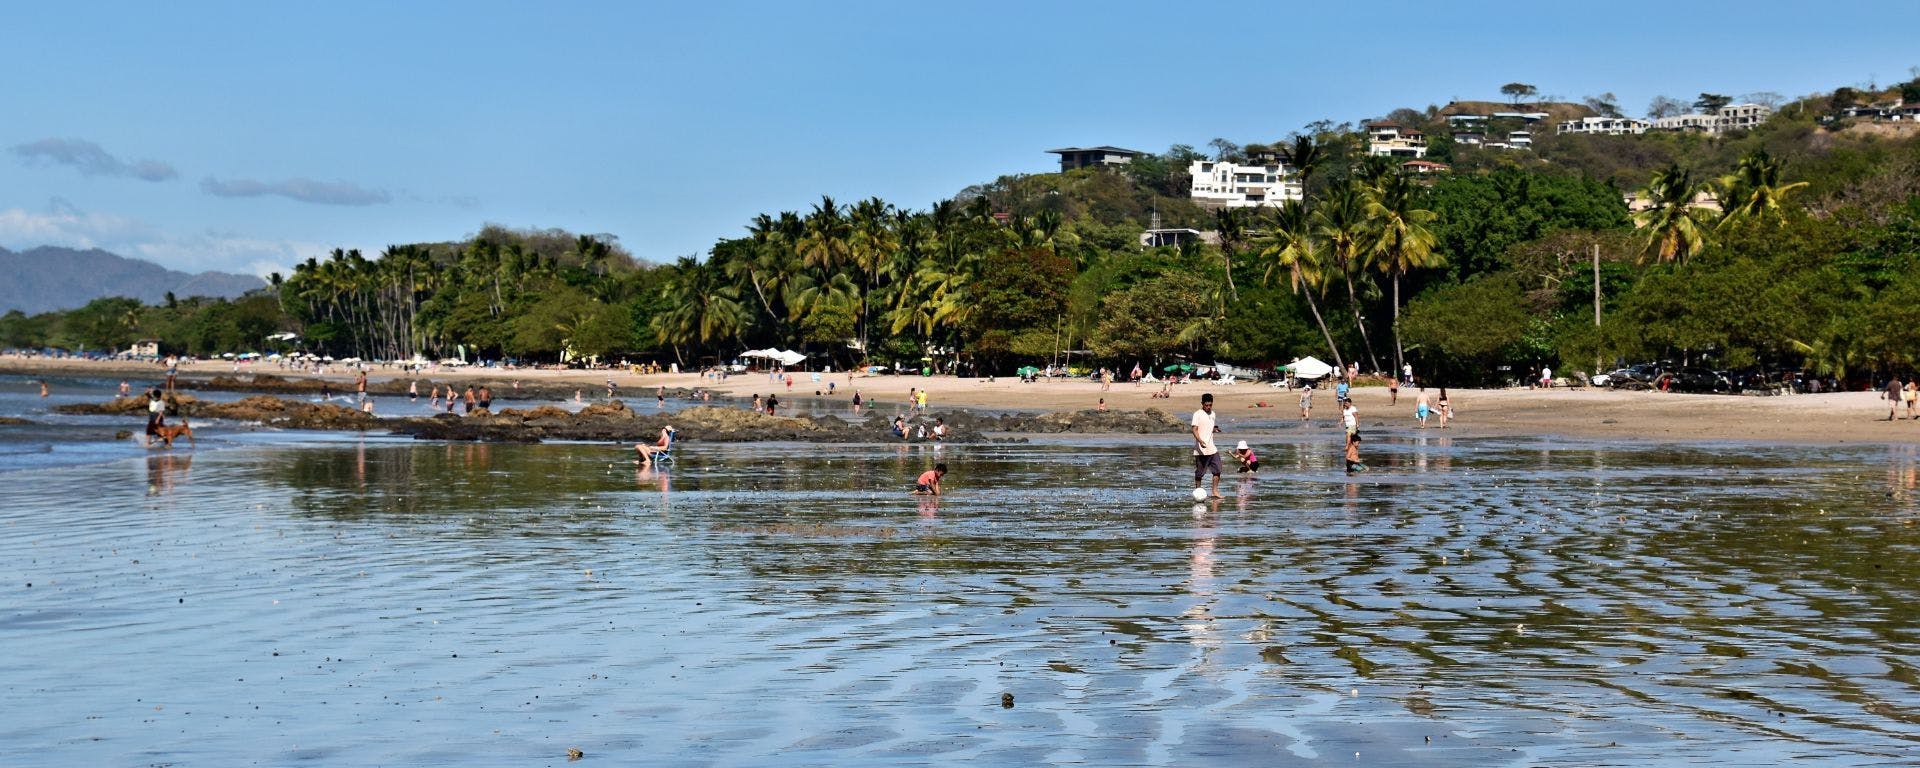 Coworking, Coliving and Surfing in Tamarindo (Costa Rica)